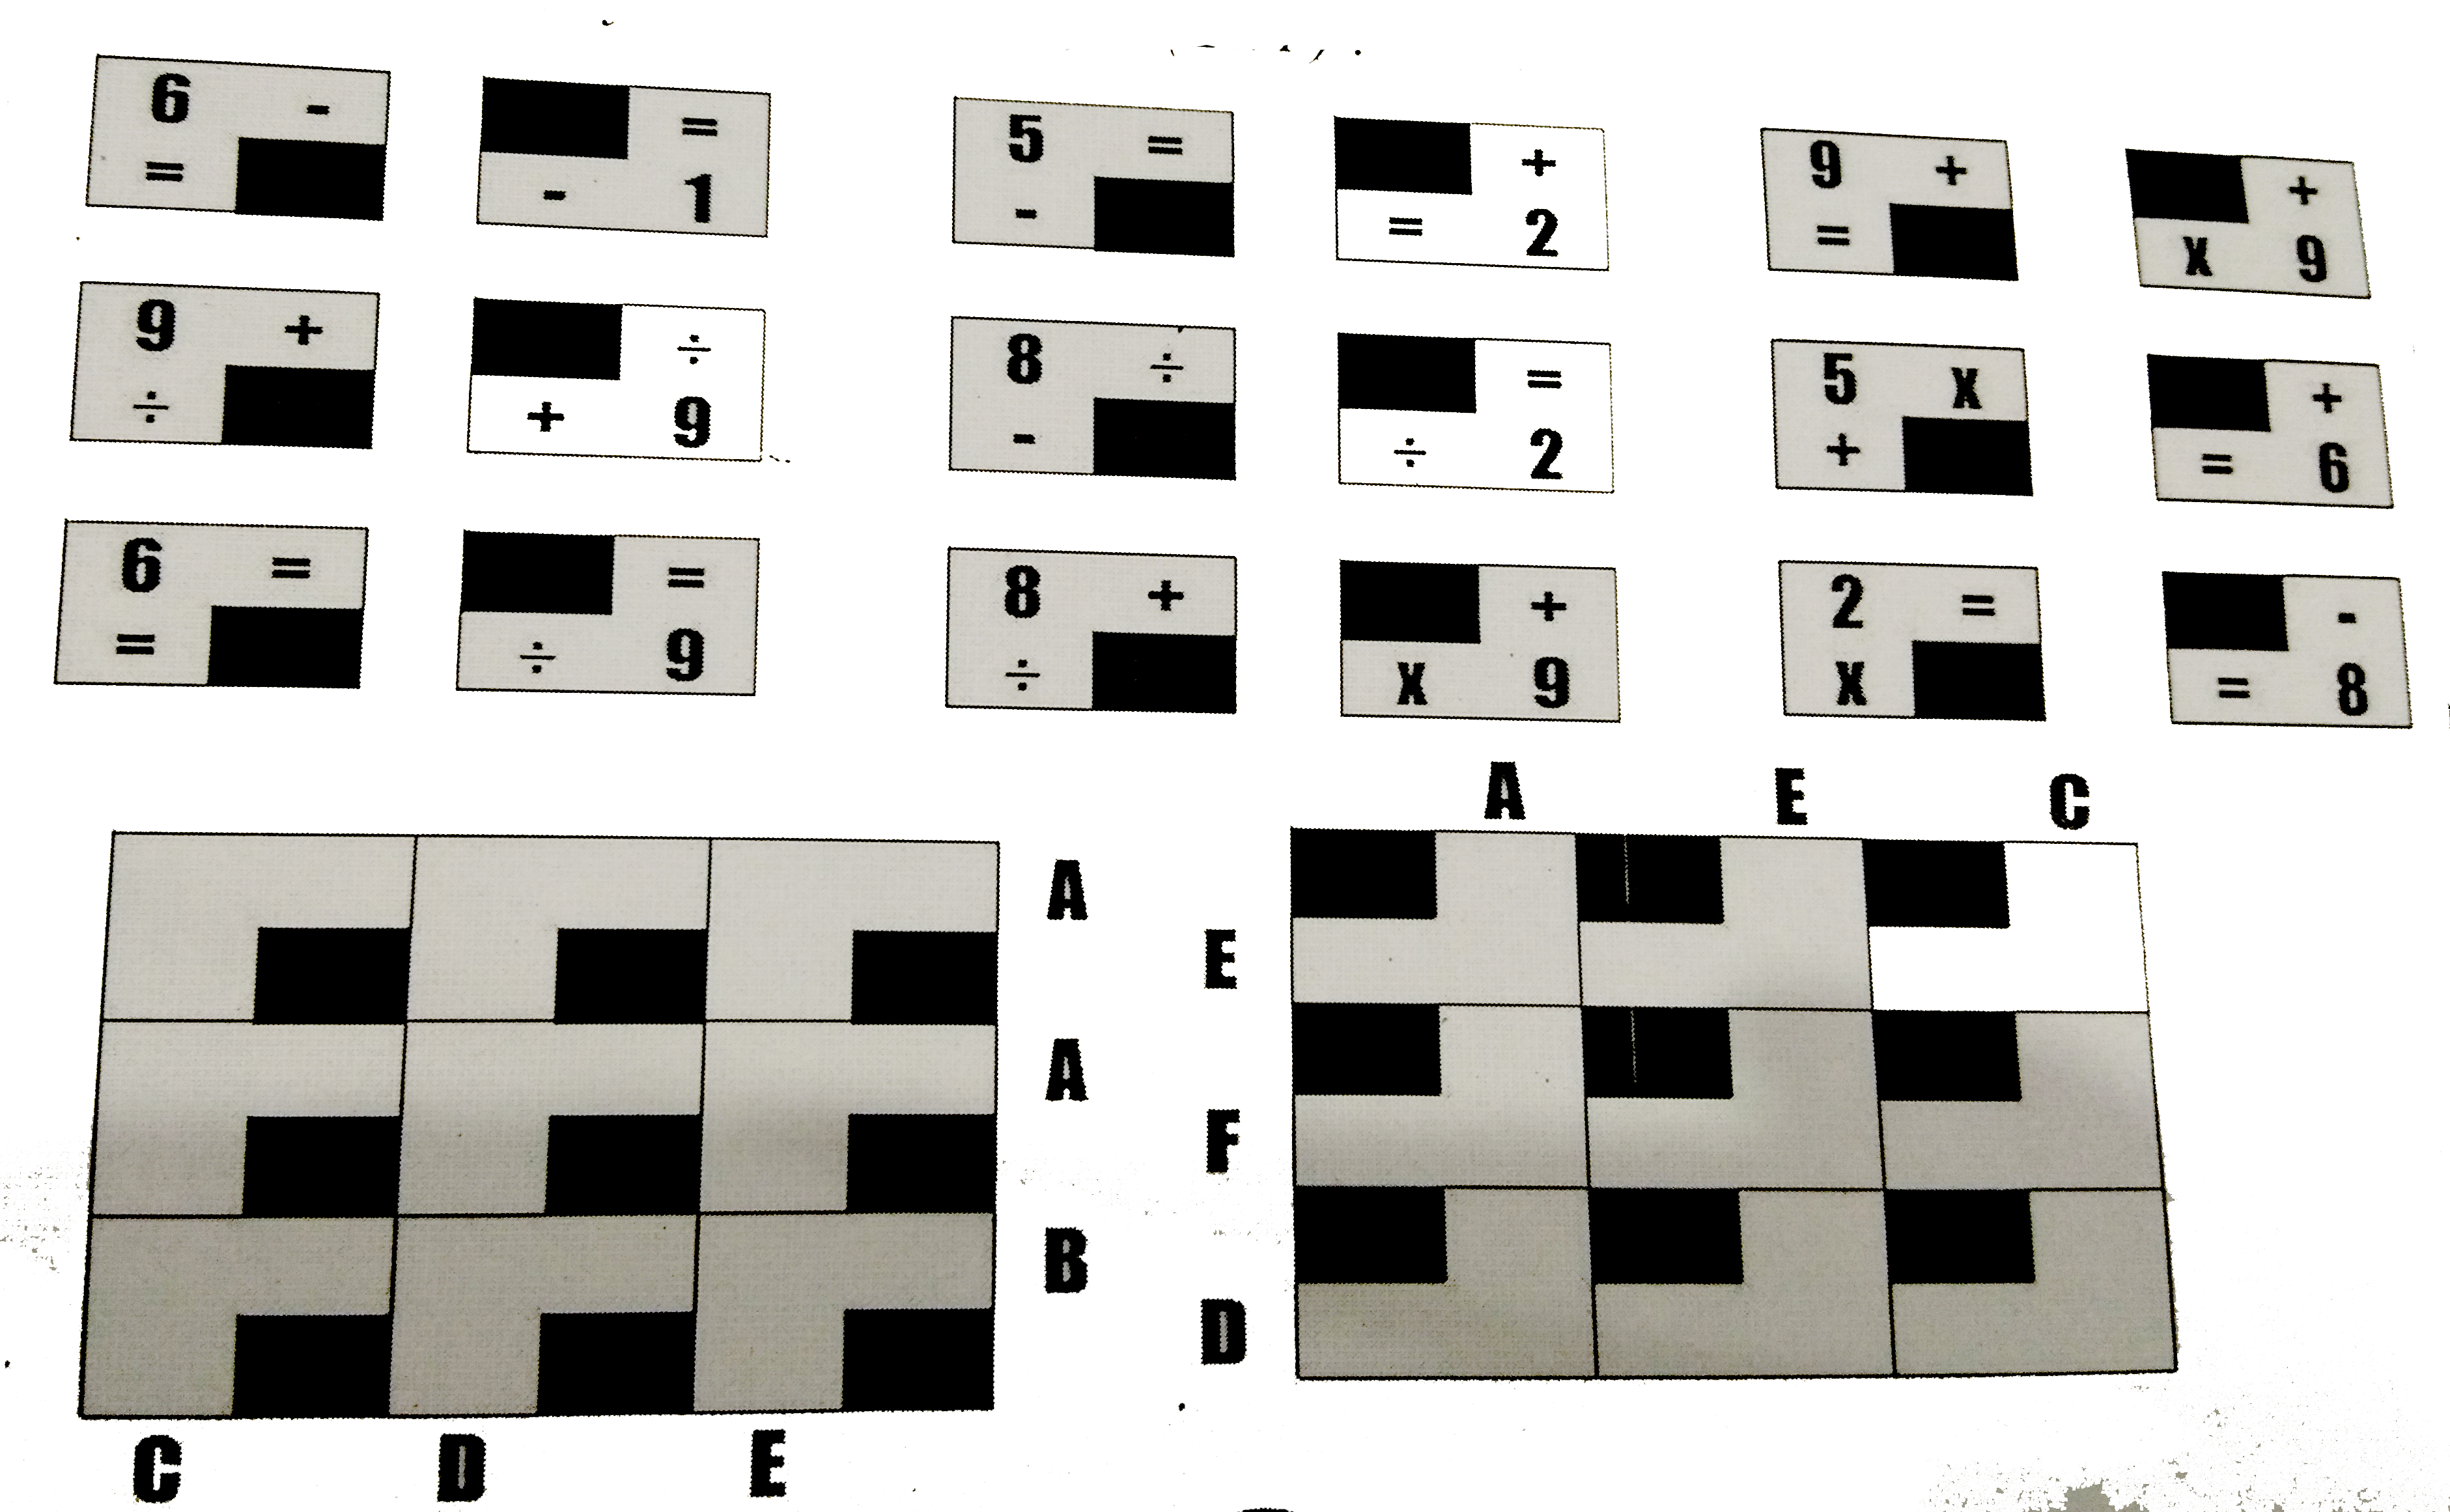 Now with Hagrid’s task out of the way, Harry now faces Mad Eye Moody. Moody has prepared a special mechanical puzzle for Harry.    There are 9 cubes, whose front and back sides are shown in the image below. The image on the left is the front, and right next to it is the back. The task is to arrange them in a 3x3 grid. The following conditions need to be followed:   •  Each letter from A to F need to be replaced with a unique number from 1-9. No two alphabets can be replaced with the same value. Once a number is assigned to an alpha- bet, the alphabet is always replaced by the same number. For example, if A is assigned the value 1, wherever there is a A, it will take the value of 1.   •  The Black region should be aligned with the Black region on the grid. When arranged, each equation reading from left to right, and each equation read up to down, should be correct.   •  When the entire arrangement is turned upside down, and placed on the 2nd grid, simi- larly, all equations should be correct.    All calculations are performed in order from left to right, or top to bottom, and each individual calculation results in a positive integer value (no negative numbers, zeros, or fractions ever need to be used). What is the value of (A xx B) + (C xx D) + (E xx F) ?